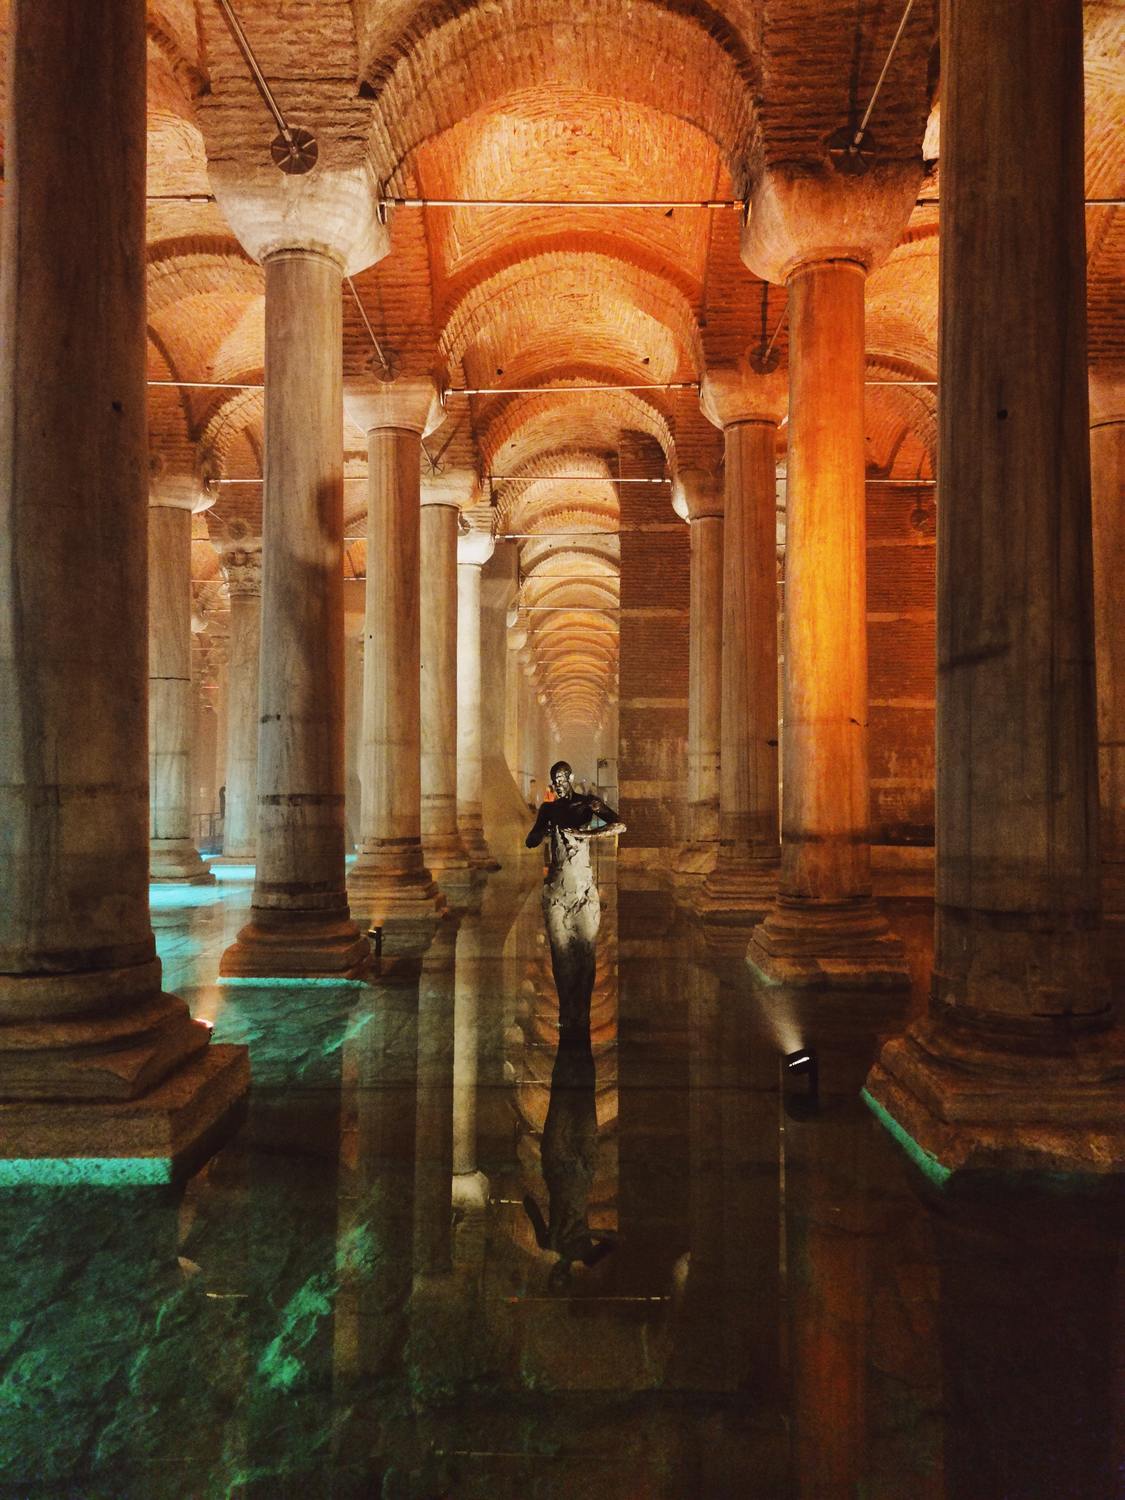 Statue of a man in the middle of the Basilica Cistern